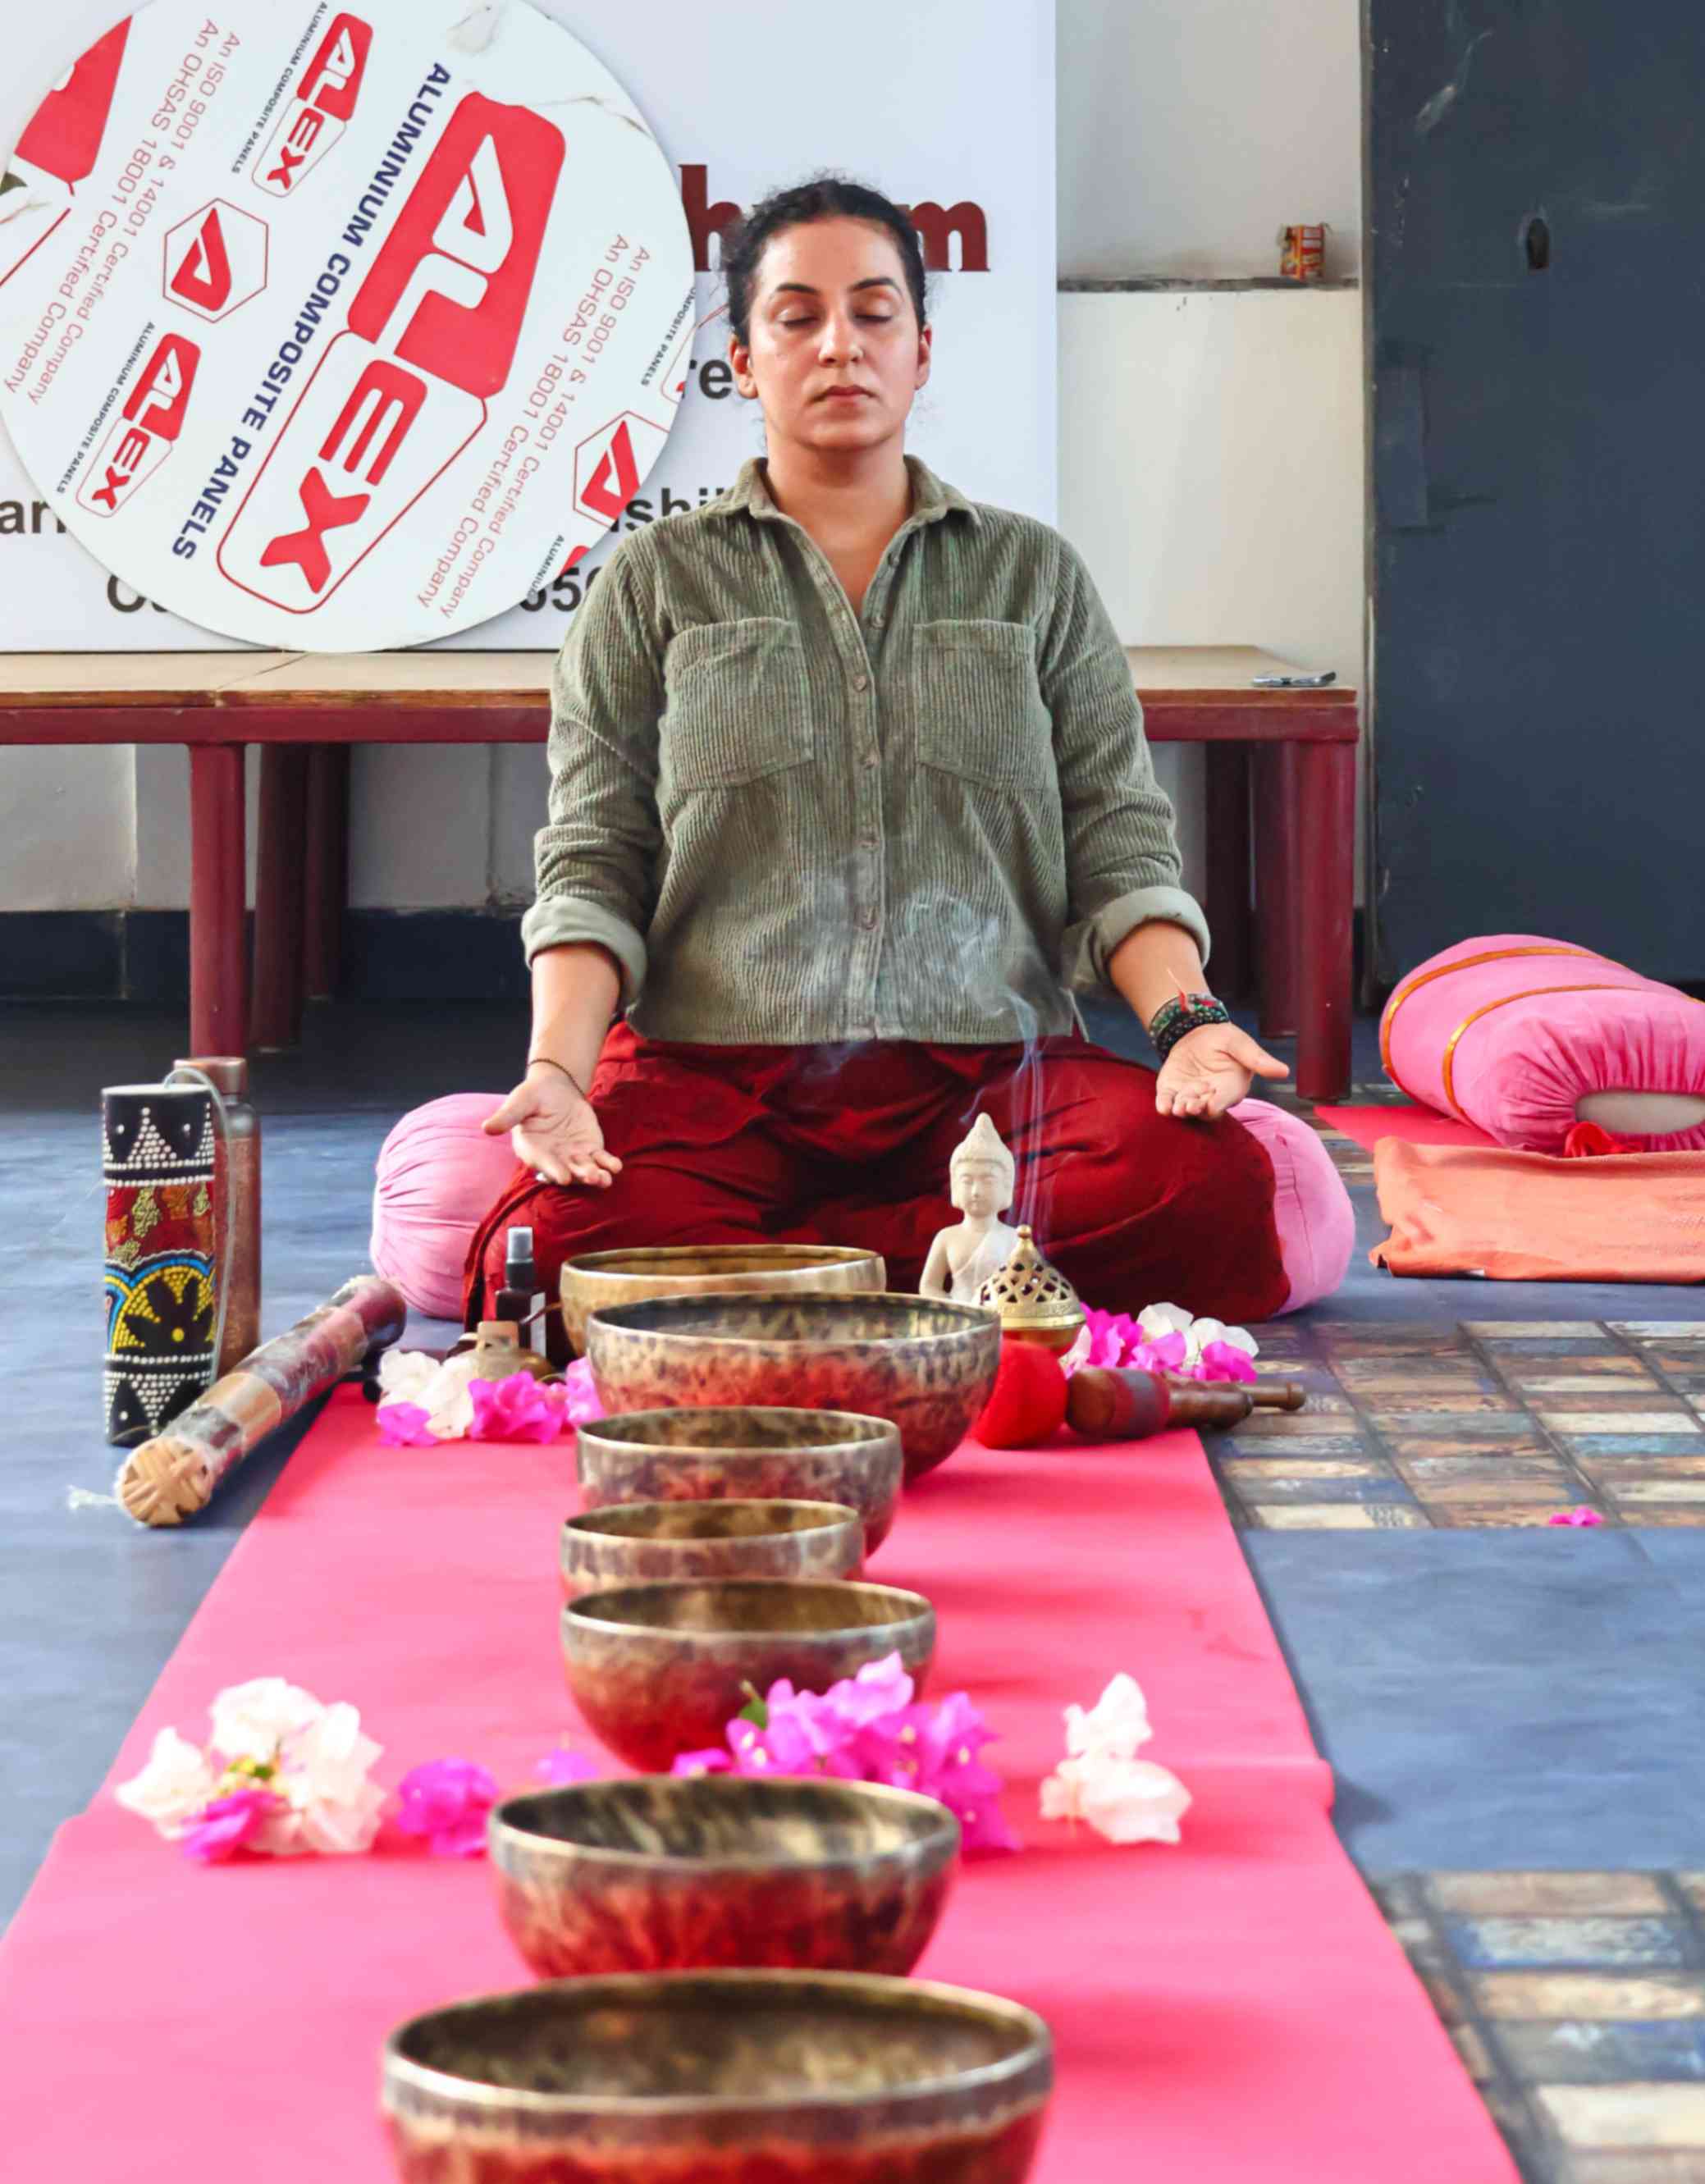 200 hour yoga teacher training in india - Sound Healing Session